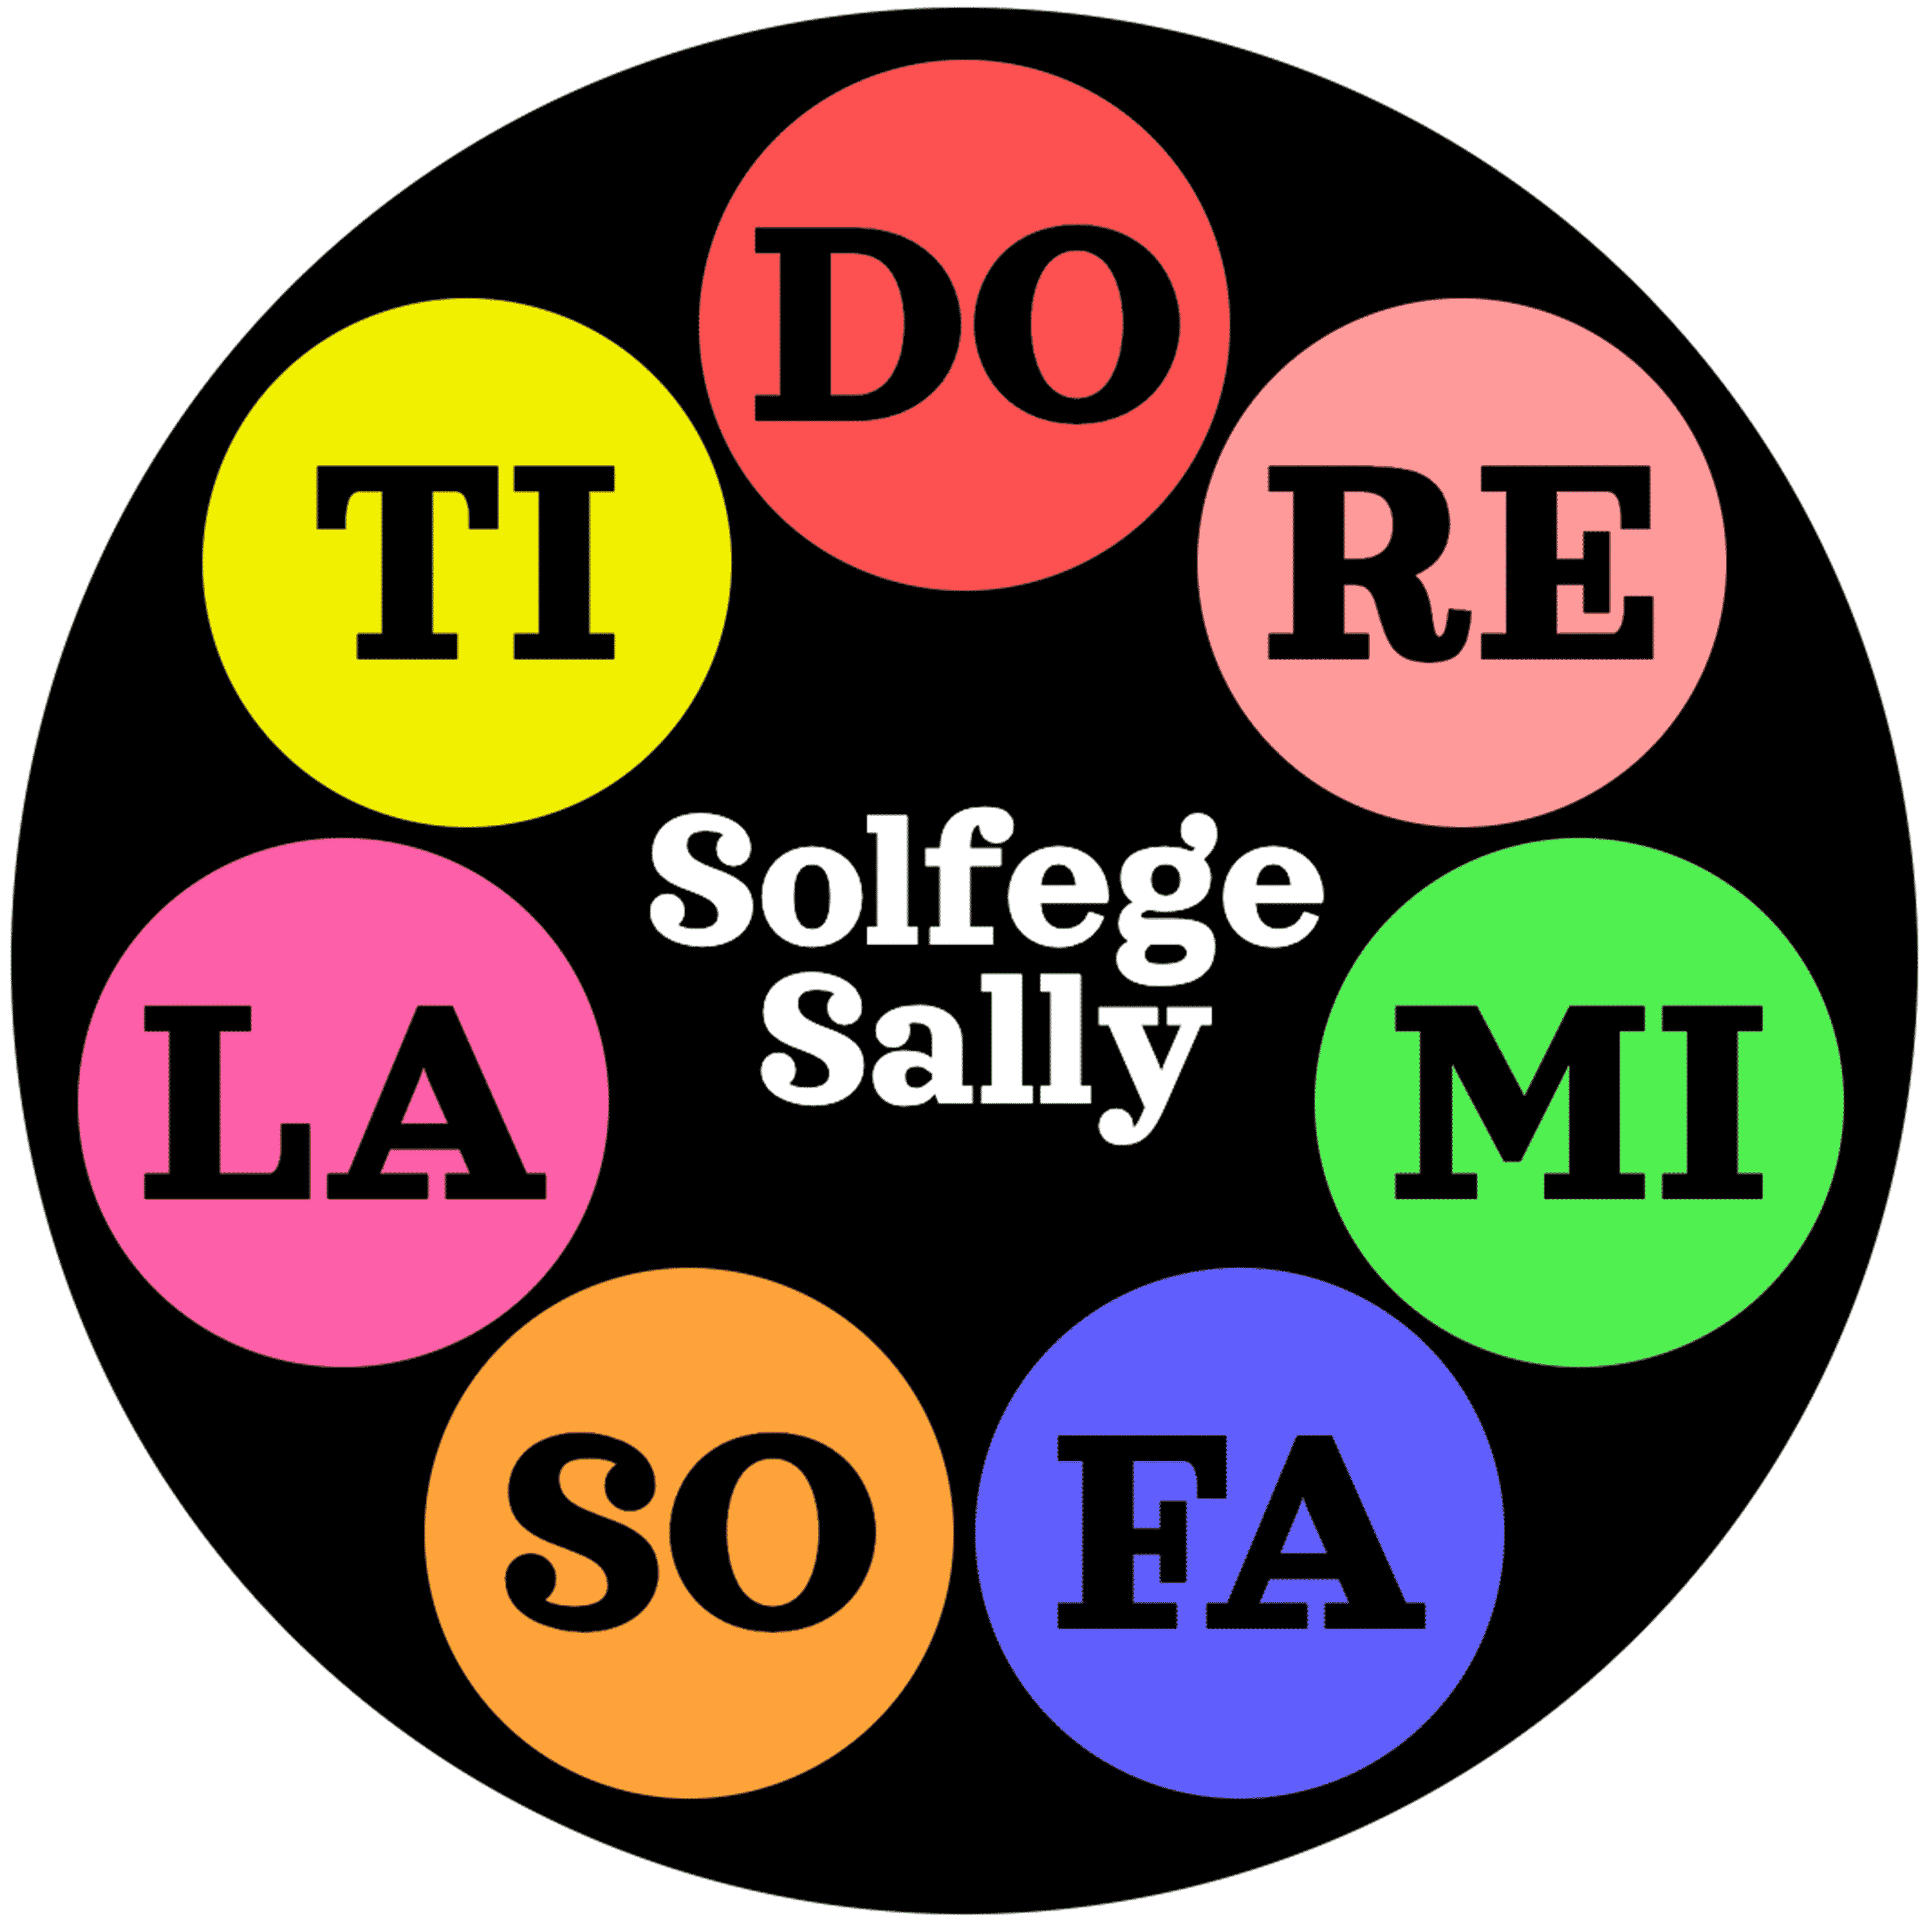 The Solfege Sally game: A black circle with the words Solfege Sally in the middle, surrounded by colorful buttons labeled Do Re Mi Fa Sol La Ti Do.